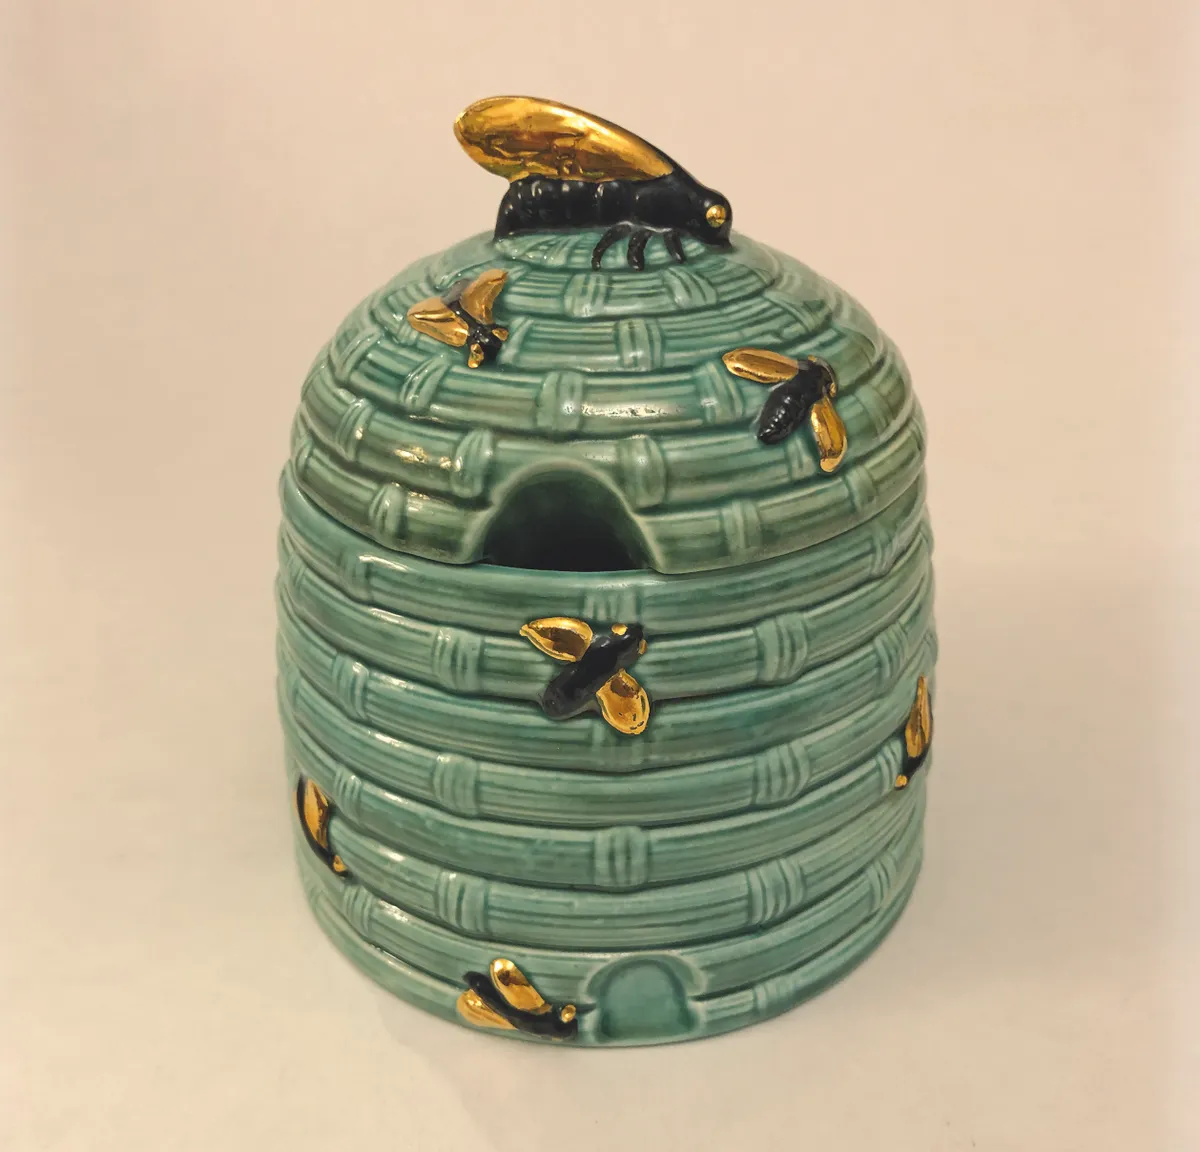 Honey pot with no identifying marks, believed to have been made in Japan for the American market, from the collection of John Doyle.